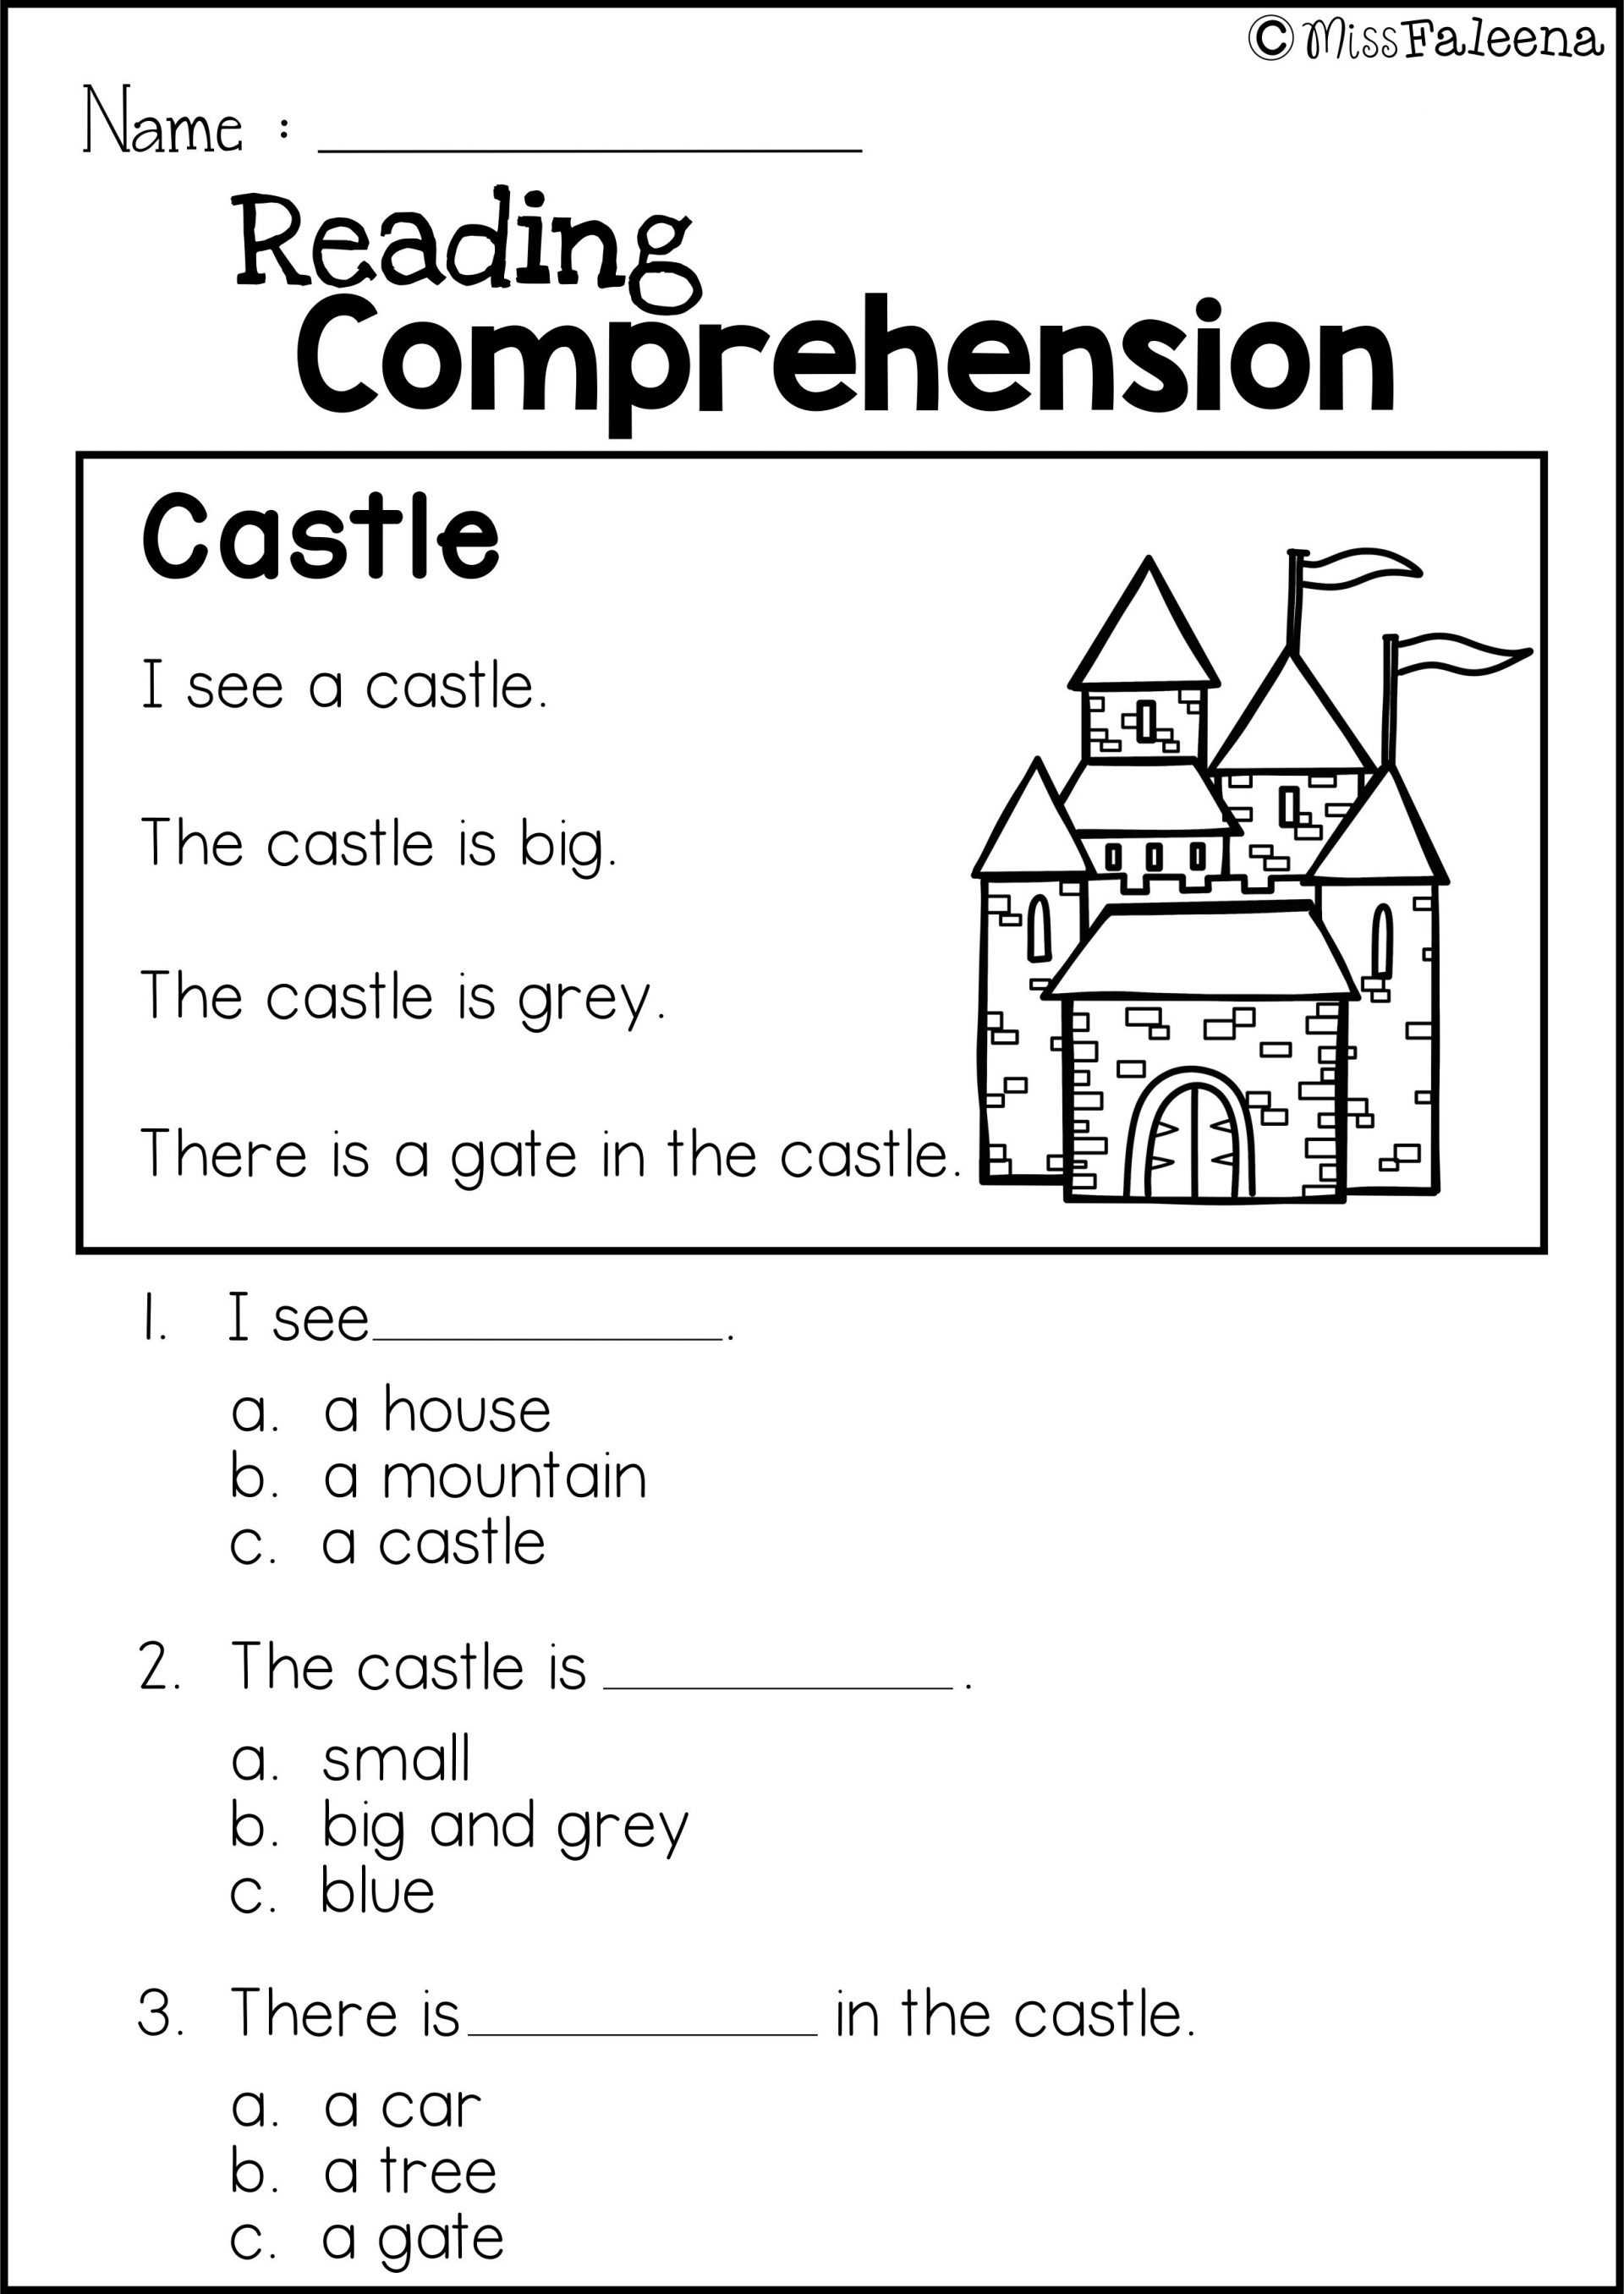 Free Reading Comprehension Worksheets for 3rd Grade together with Activities Printable Phonics Worksheets for Kindergarten